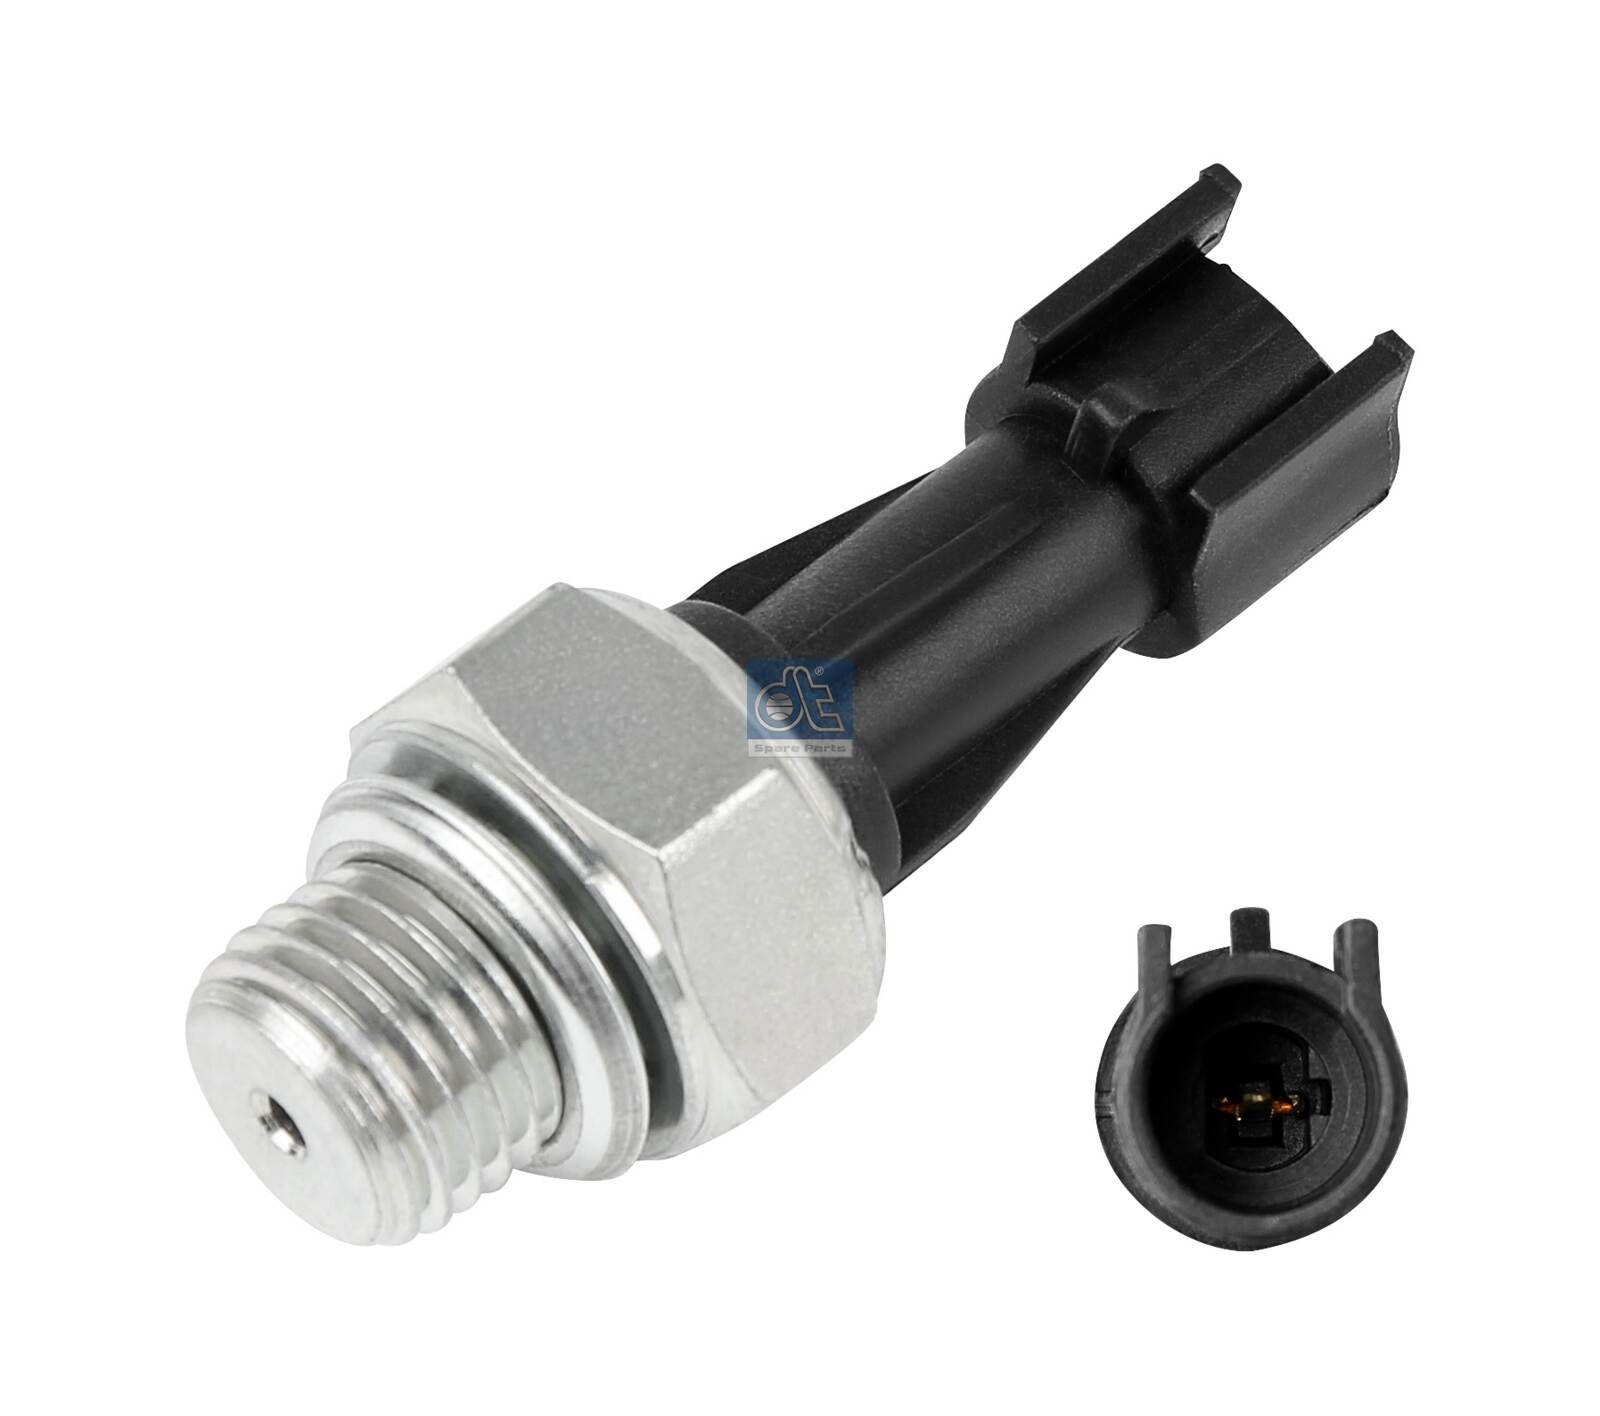 7.80131 DT Spare Parts Oil pressure switch SEAT M14 x 1,5, 0,4 bar, 0,3 - 0,55 bar